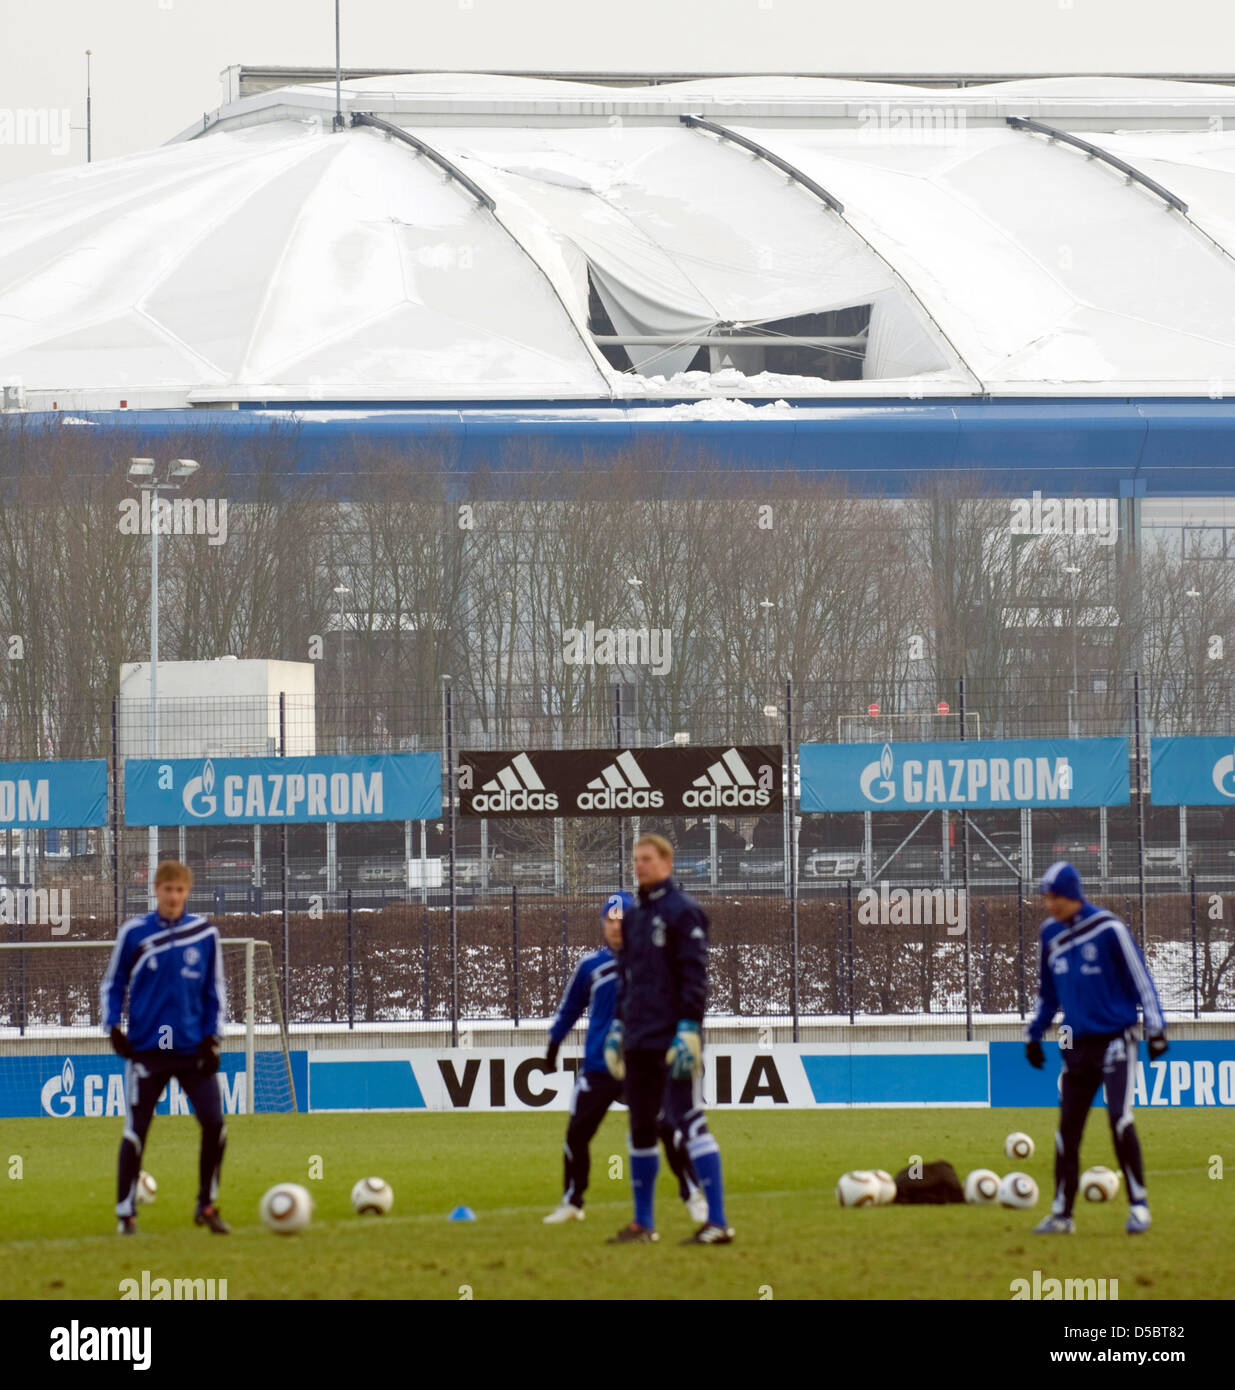 Players of German Bundesliga soccer club FC Schalke practice on an outdoor pitch in front of Veltins Arena with a damaged roof in Gelsenkirchen, Germany, 13 January 2010. The hole could cause the Bundesliga match FC Schalke vs FC Nuremberg, which is due to take place on 17 January 2010 at VeltinsArena, to be postponed. Photo: BERND THISSEN Stock Photo